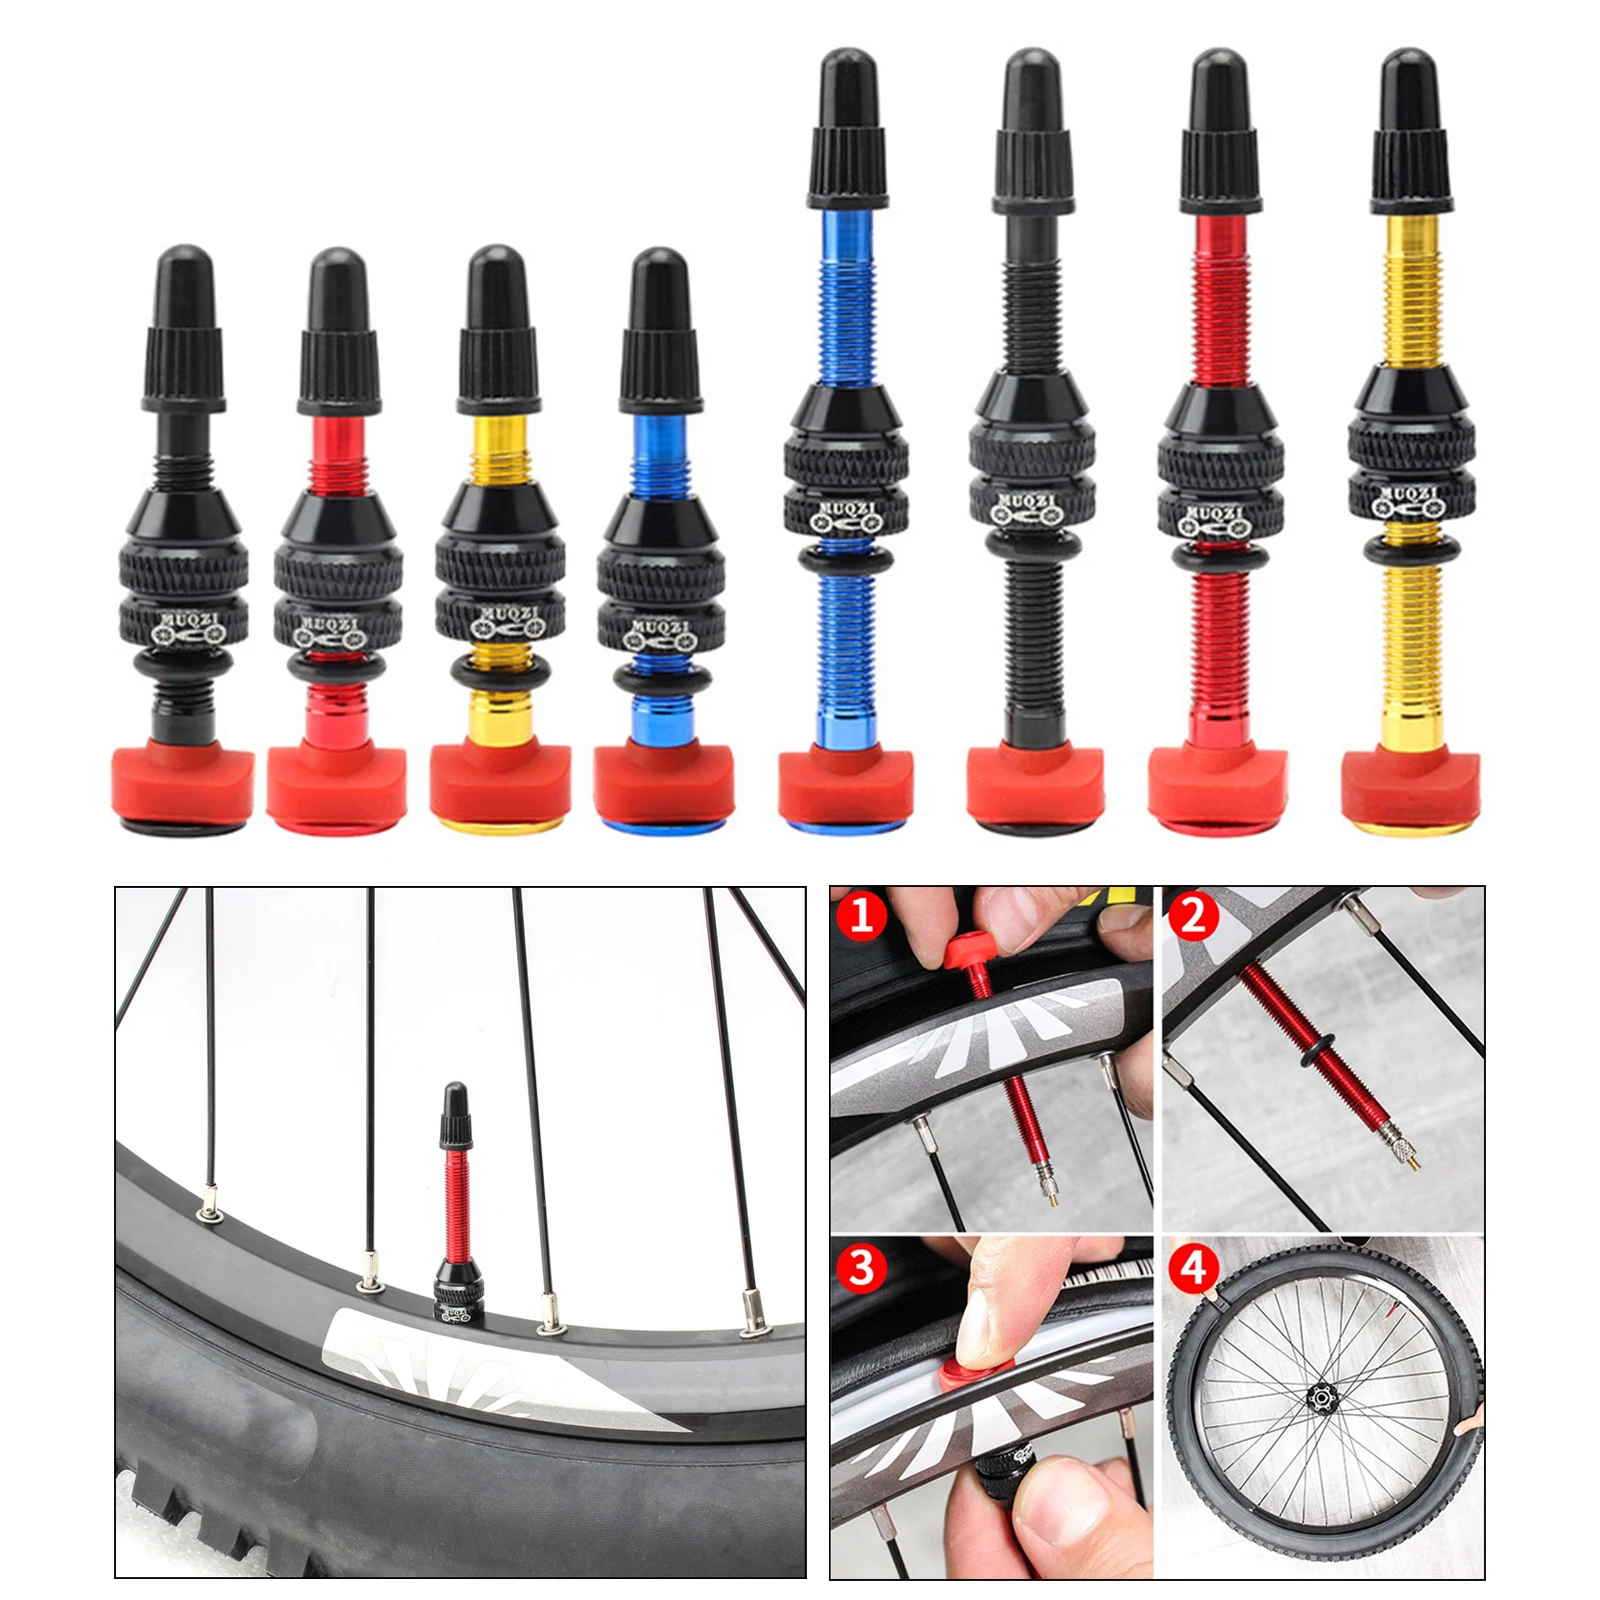 Bicycle 40/60mm Presta Valve for Road MTB Bicycle Tubeless Tires Brass Core Alloy Stem